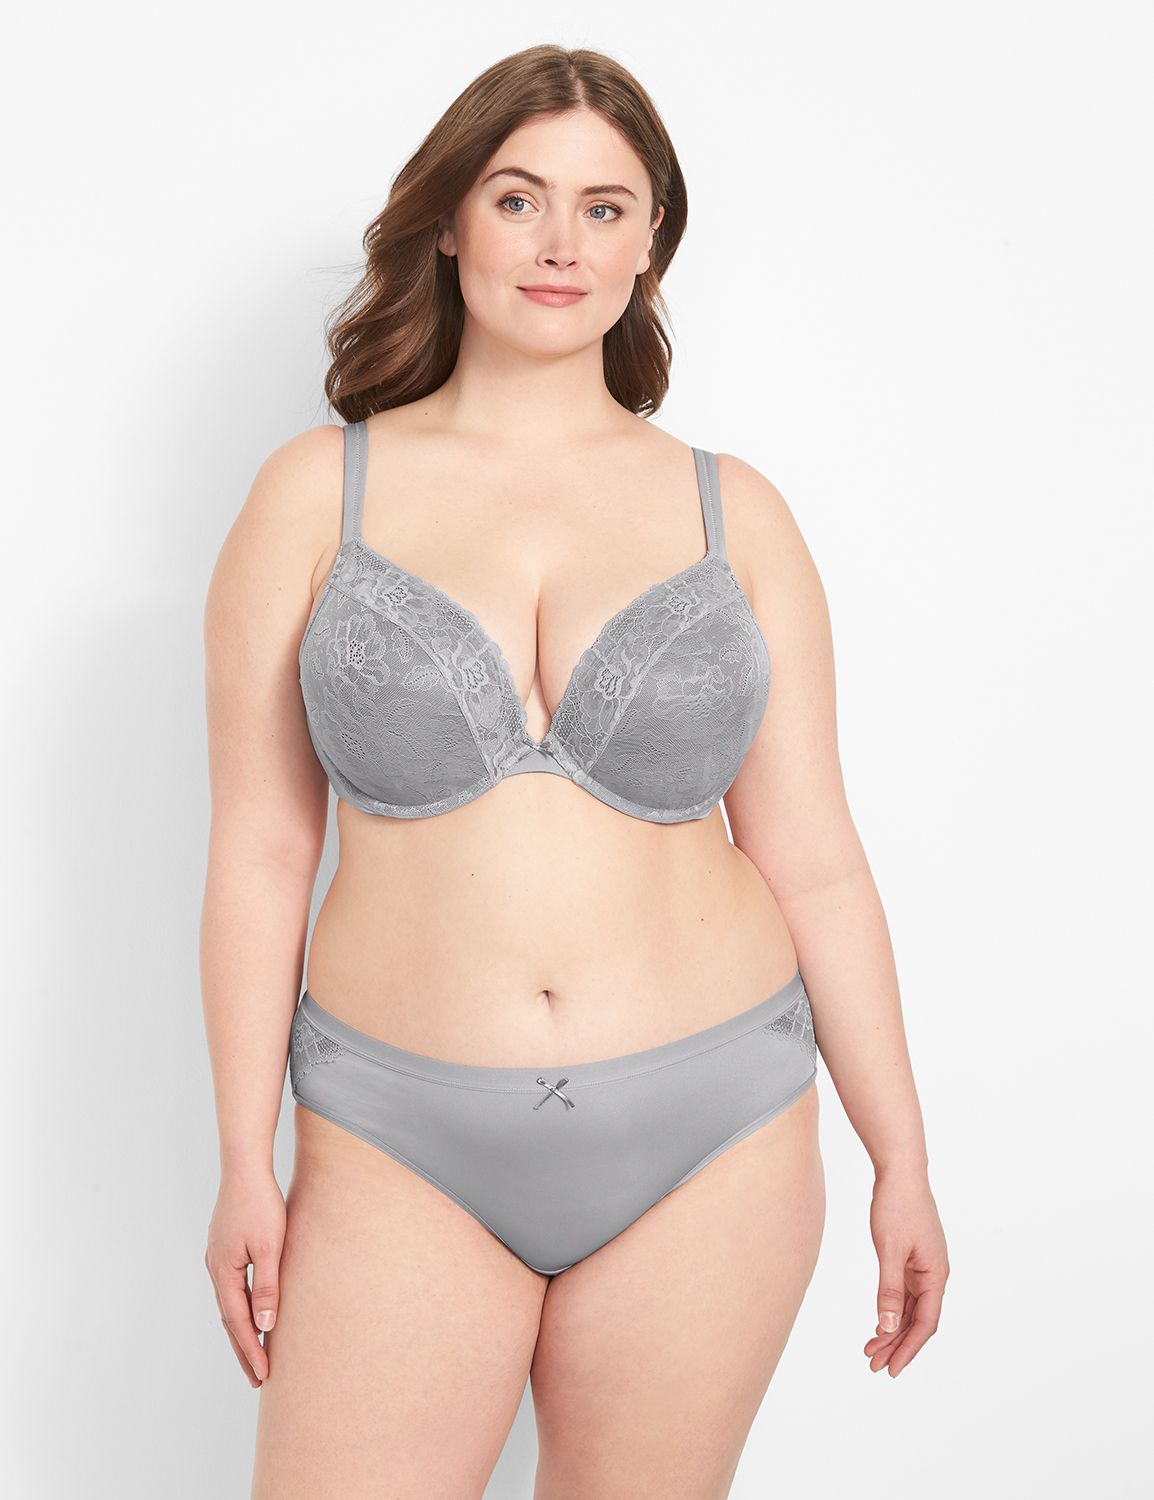 Lane Bryant - Look at you smooth operators 😍 Obsessed with